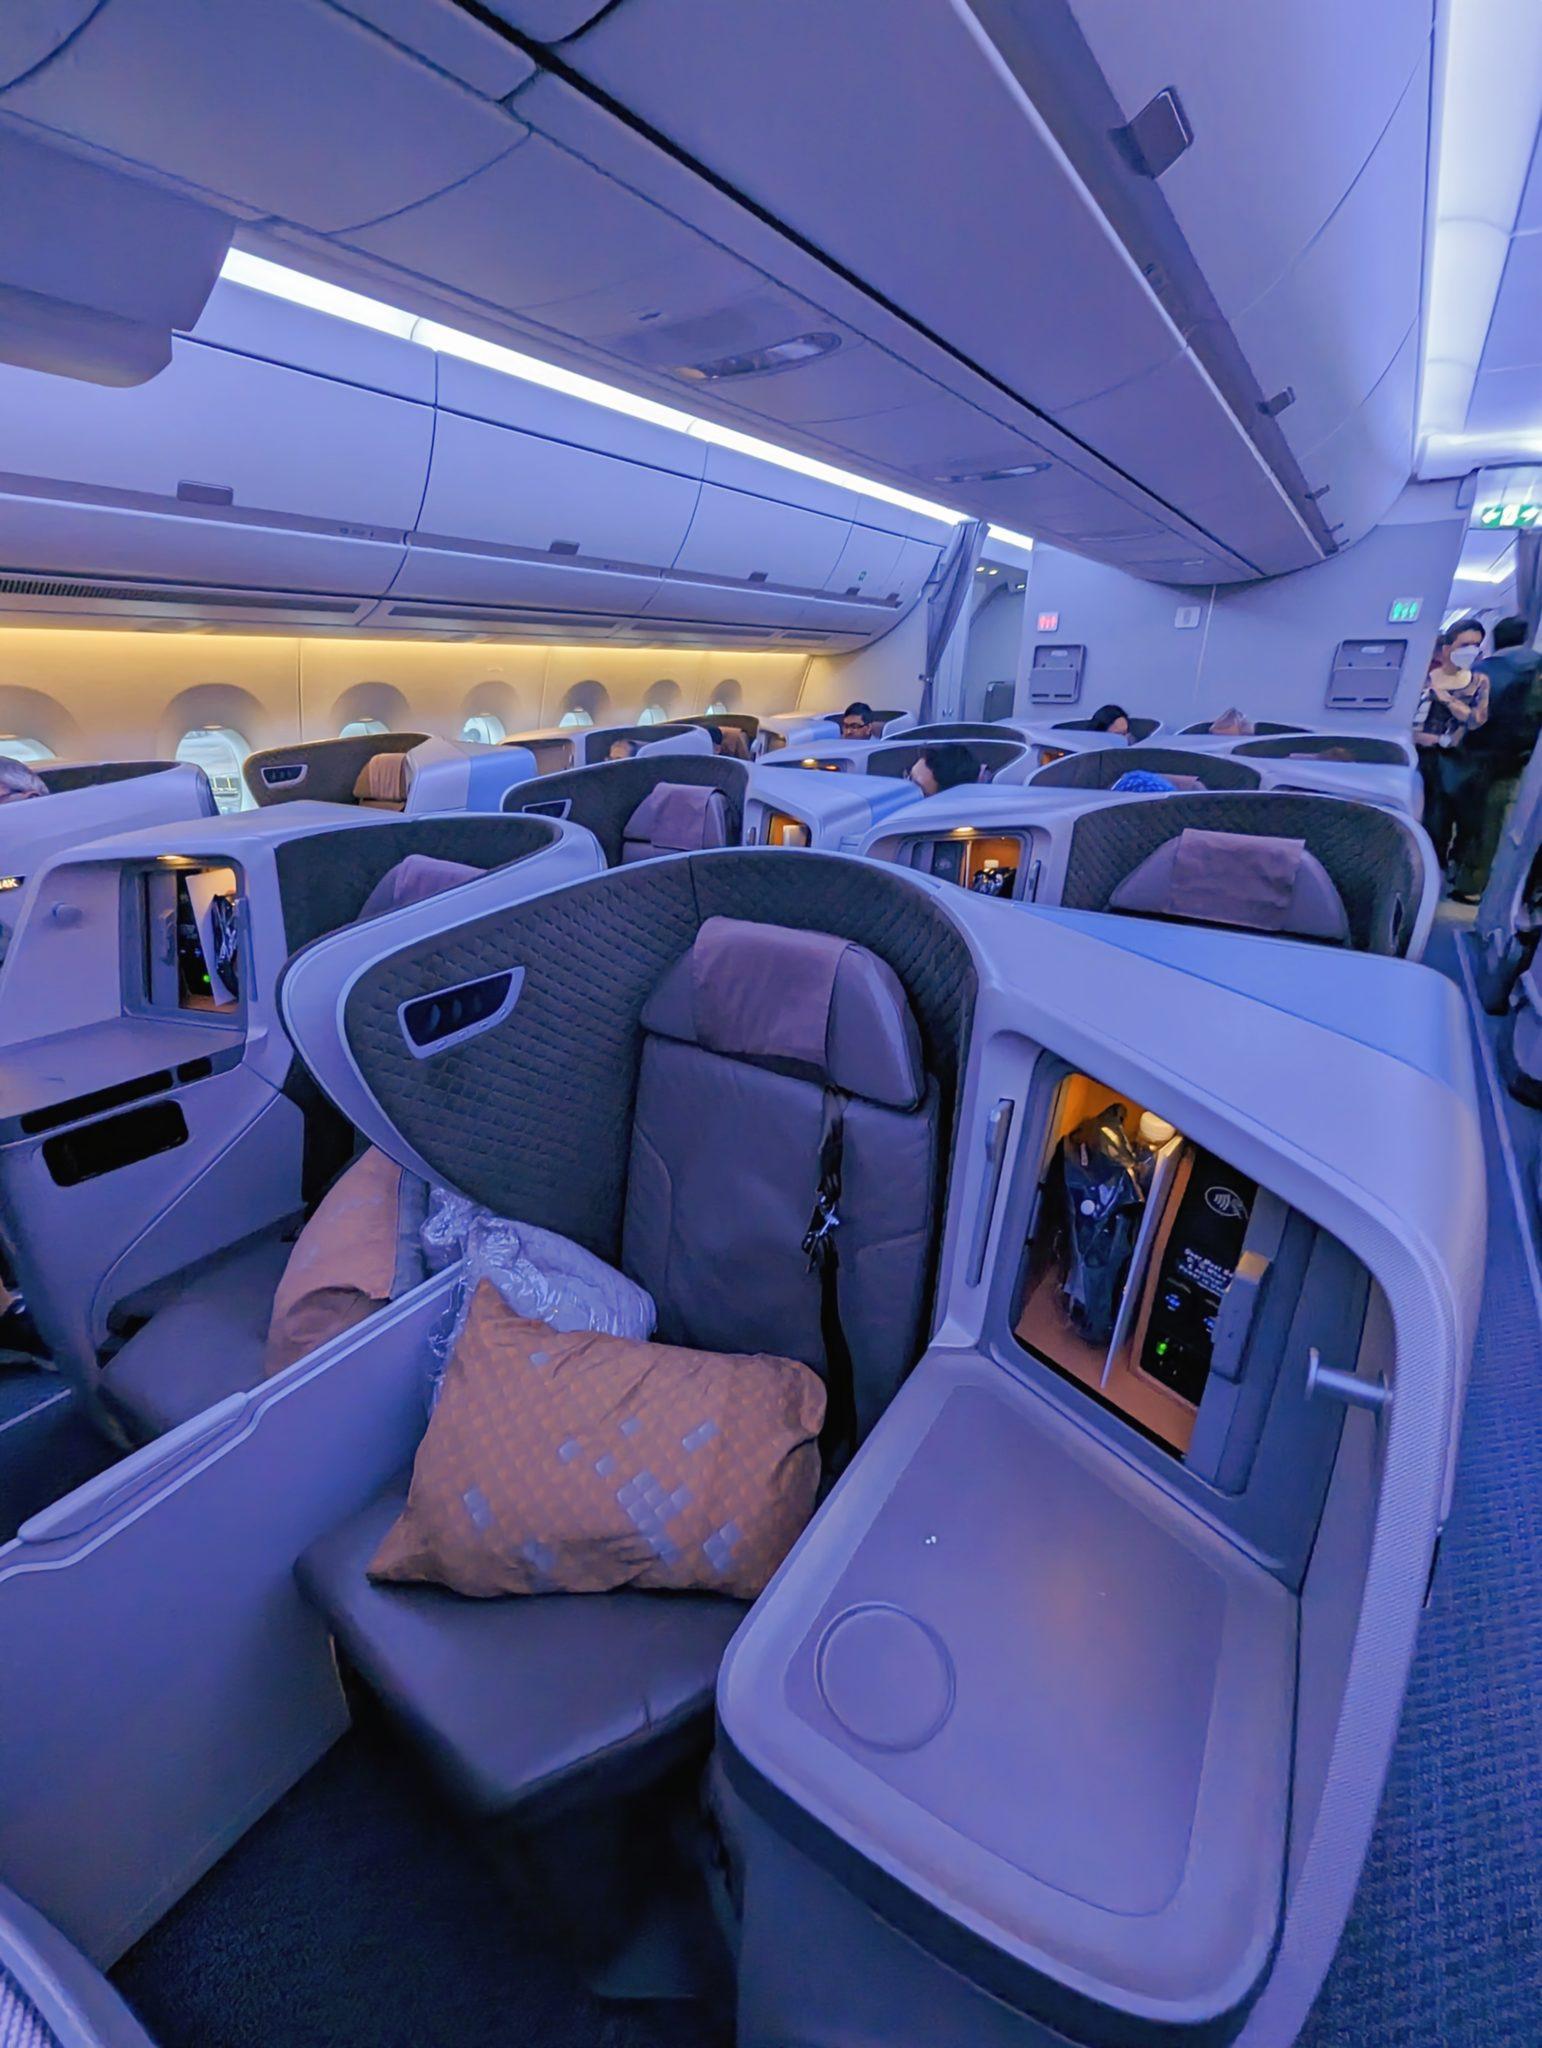 Review Singapore Airlines Lackluster Business Class to Sydney Travel